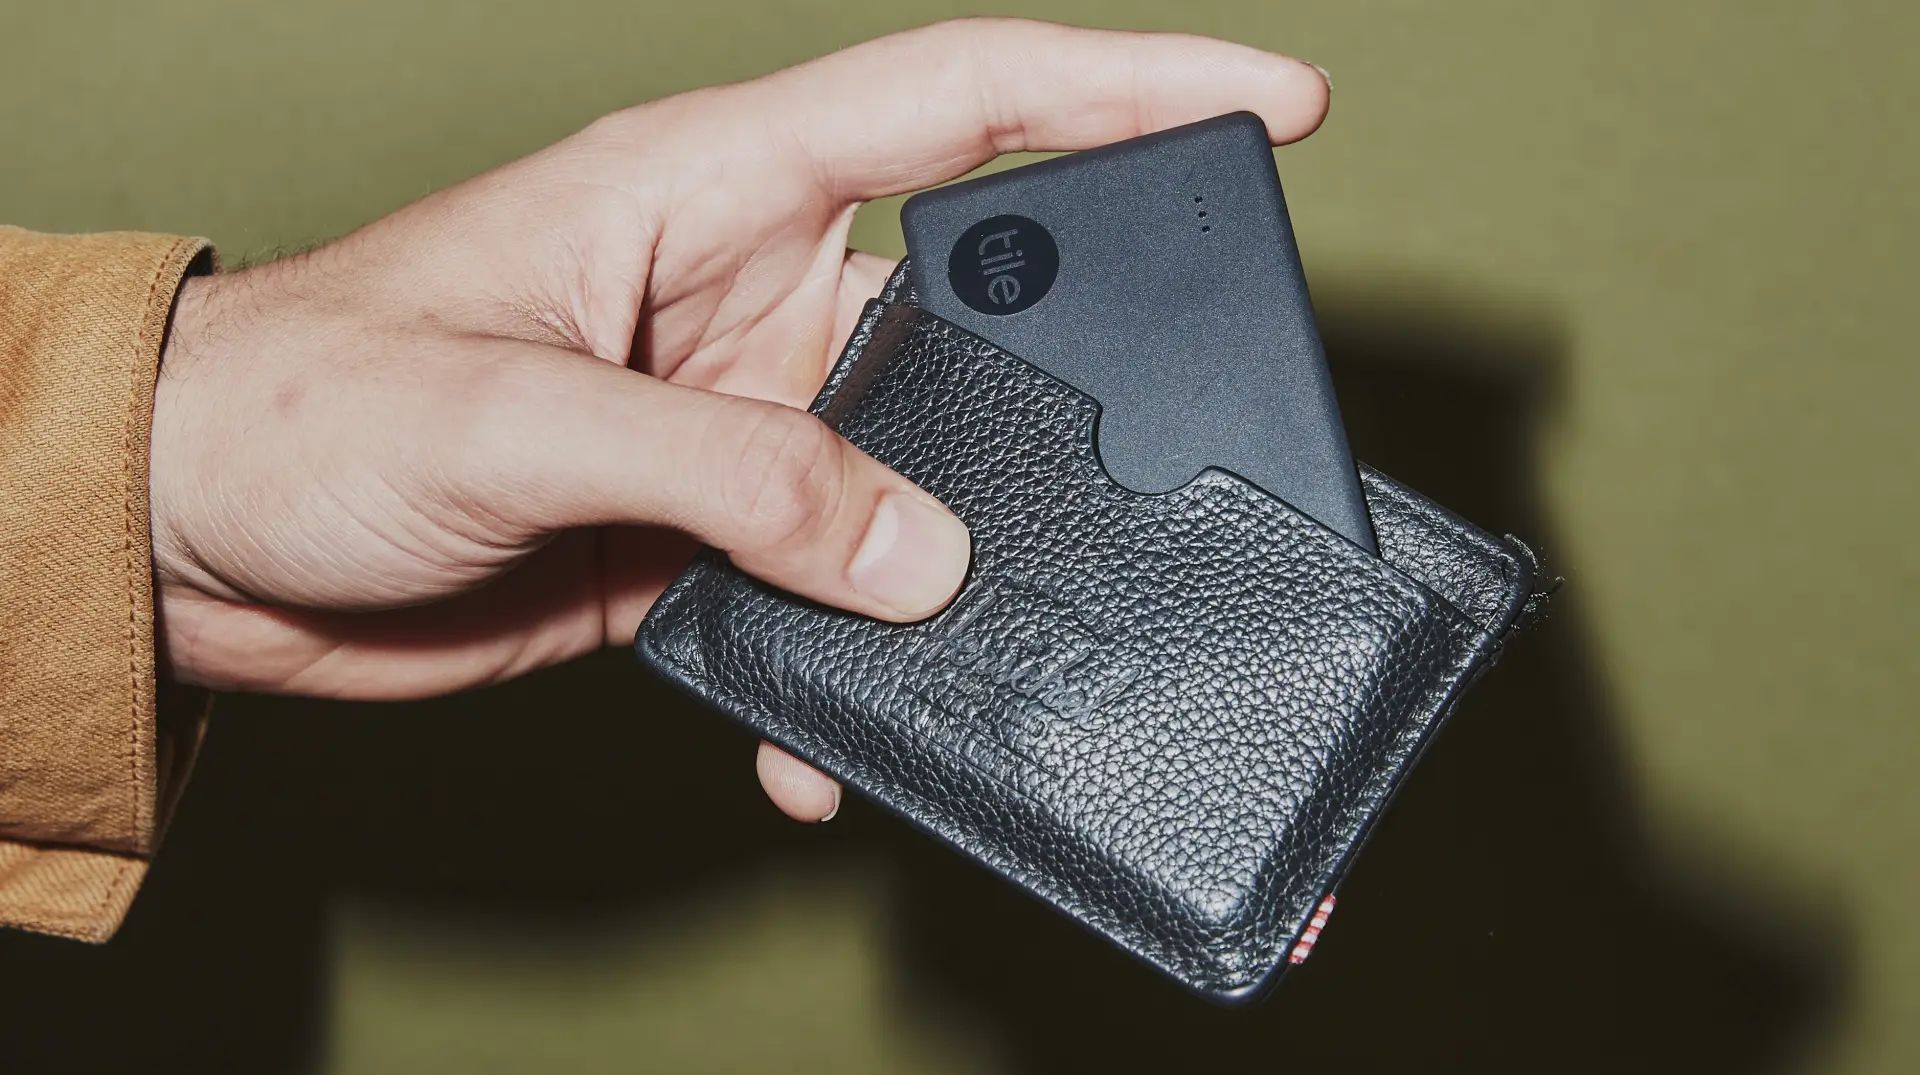 A man sliding a Tile Slim Bluetooth tracker into his wallet